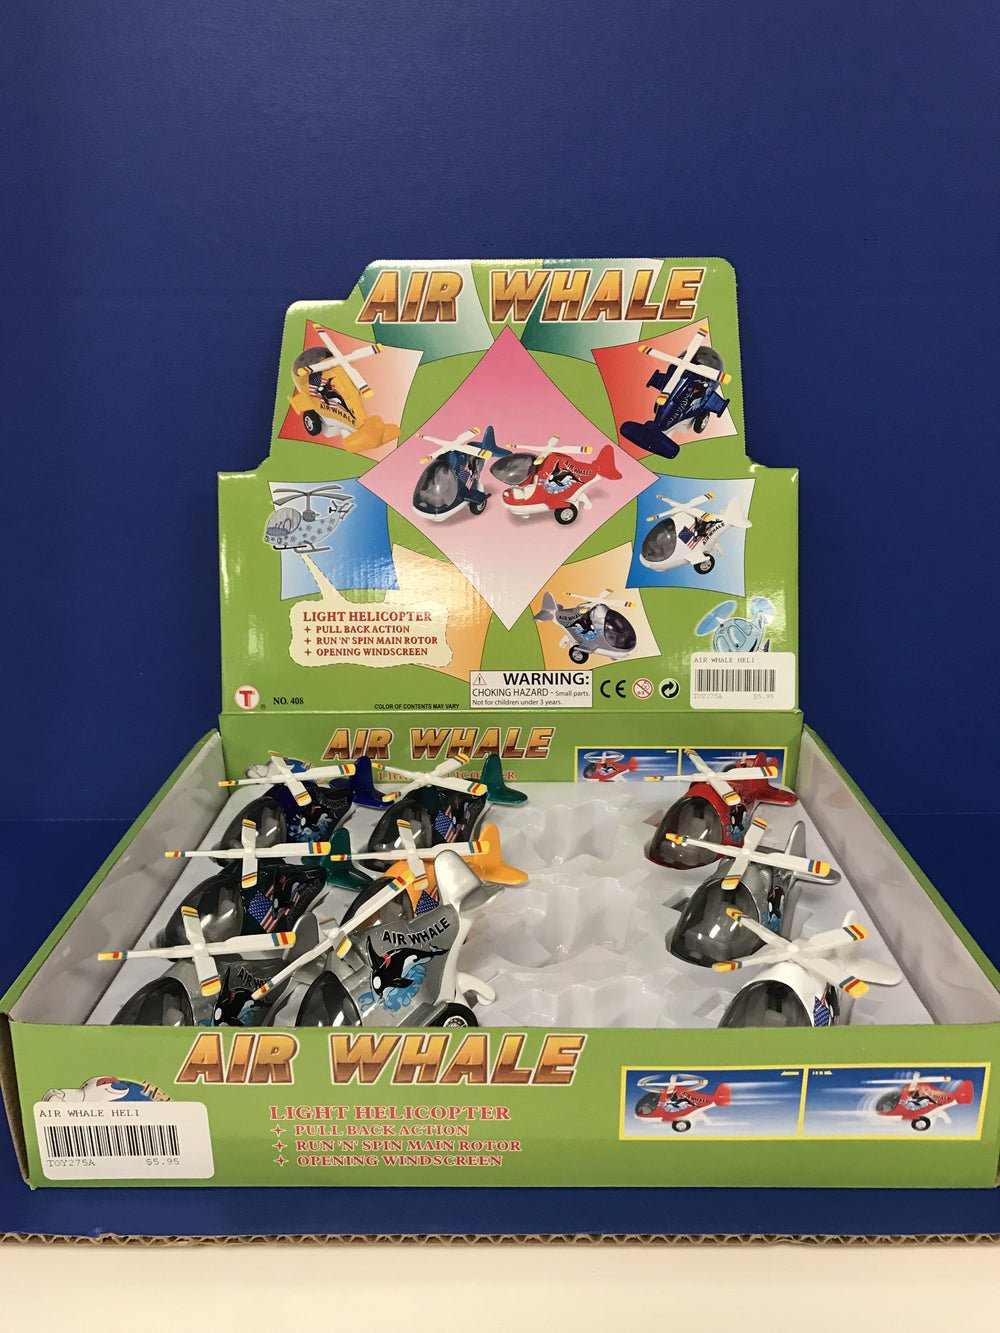 Air Whale Helicopter Toy